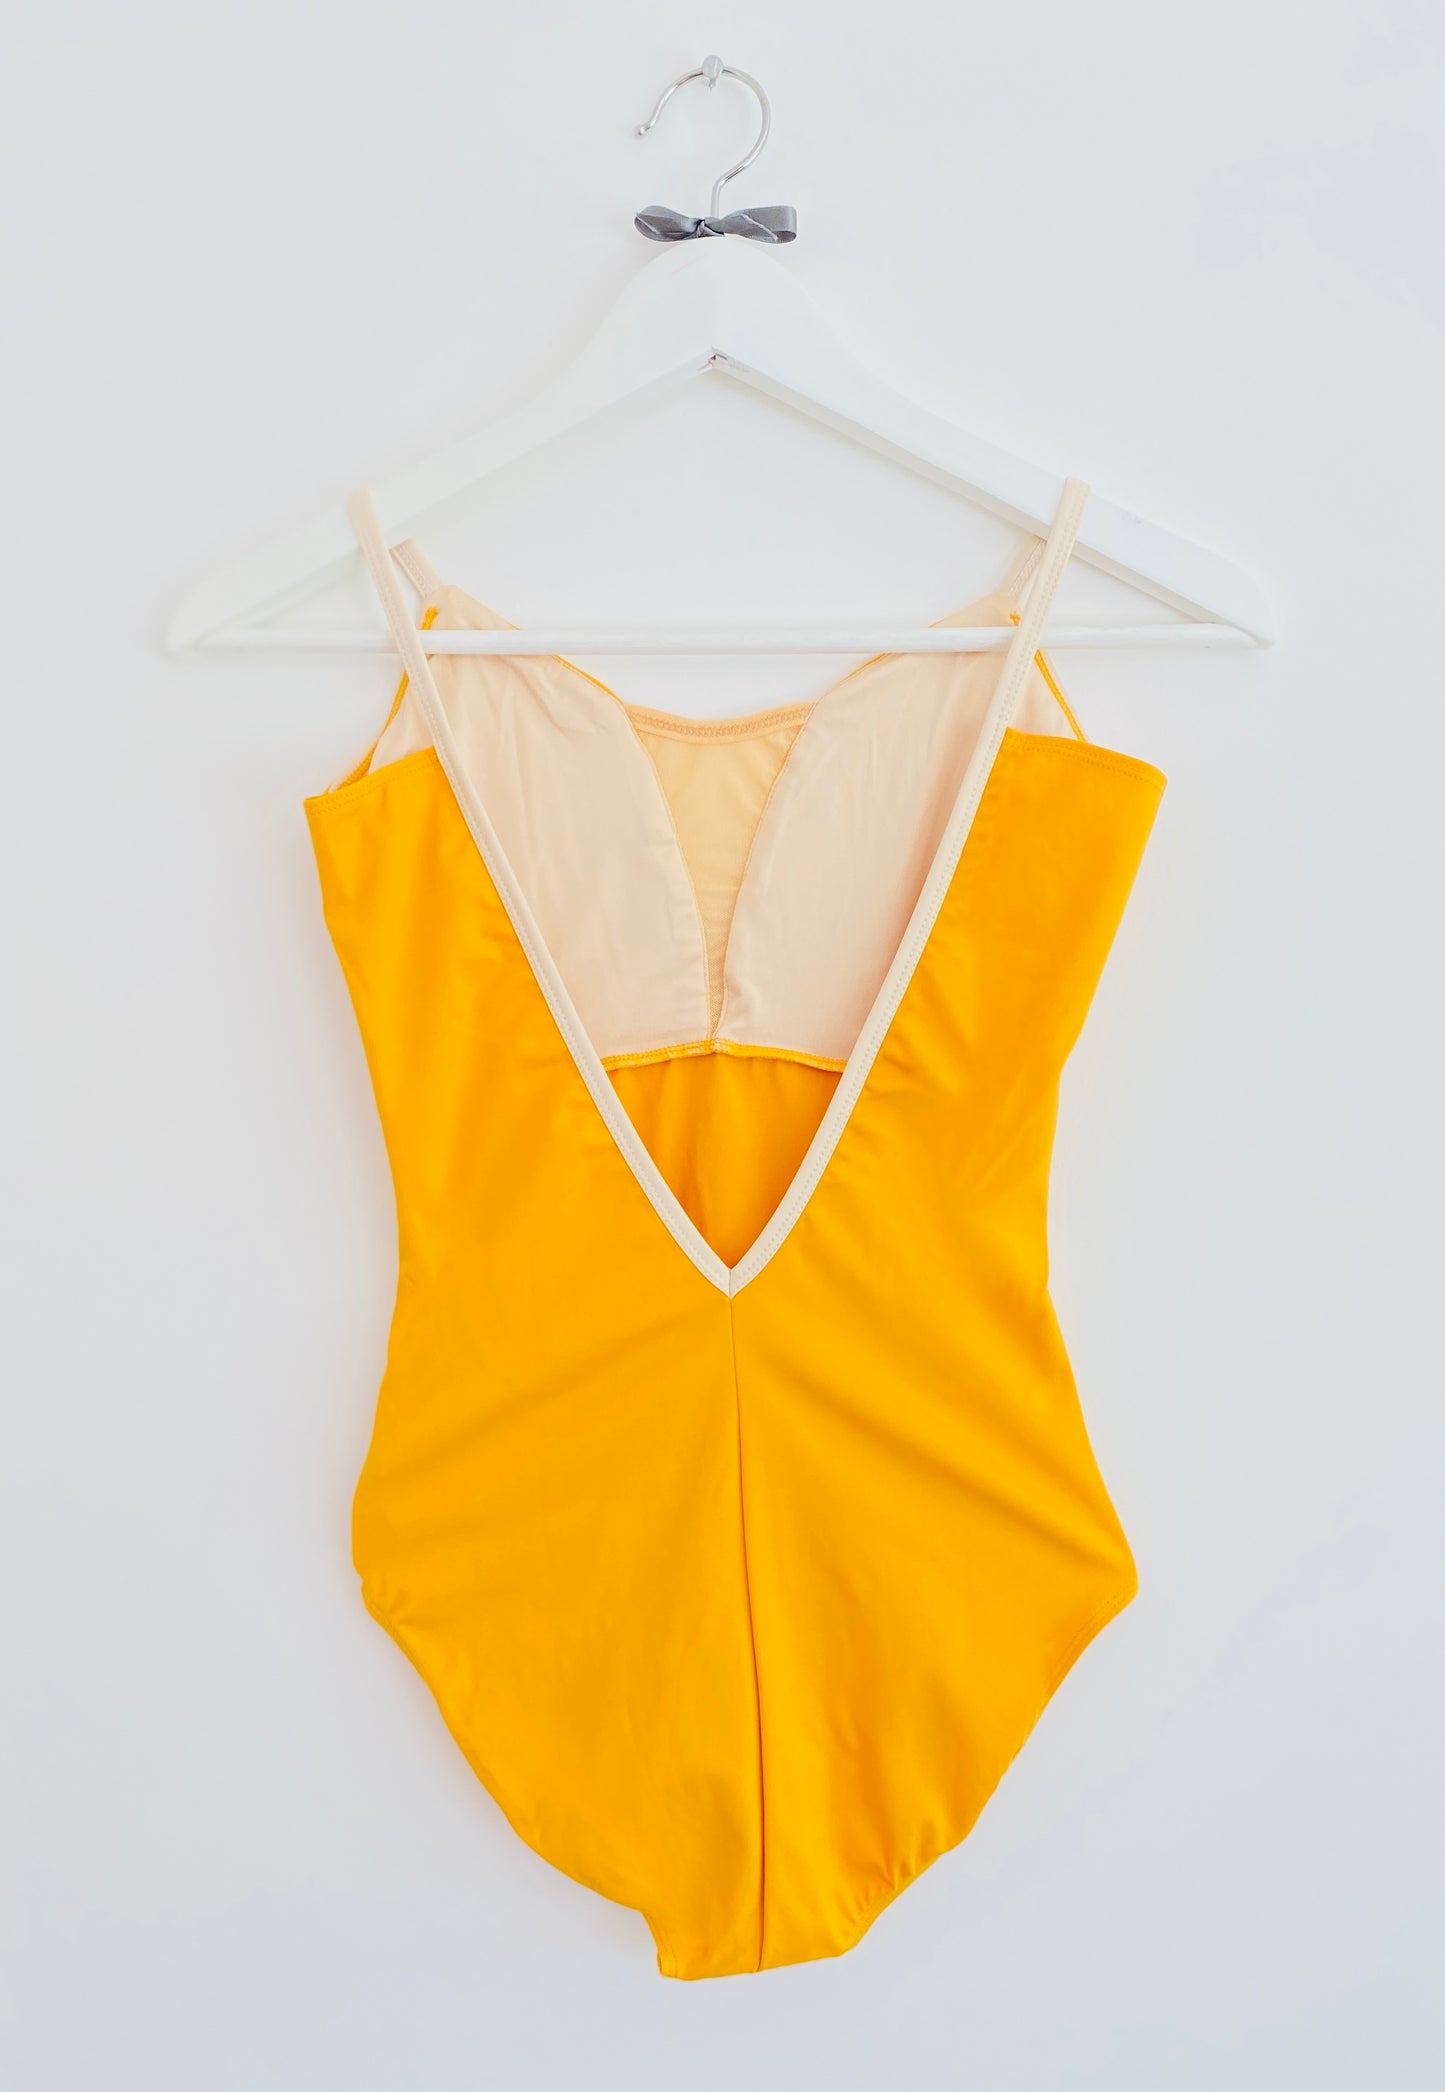 Saffron yellow V mesh camisole with deep back from The Collective Dancewear